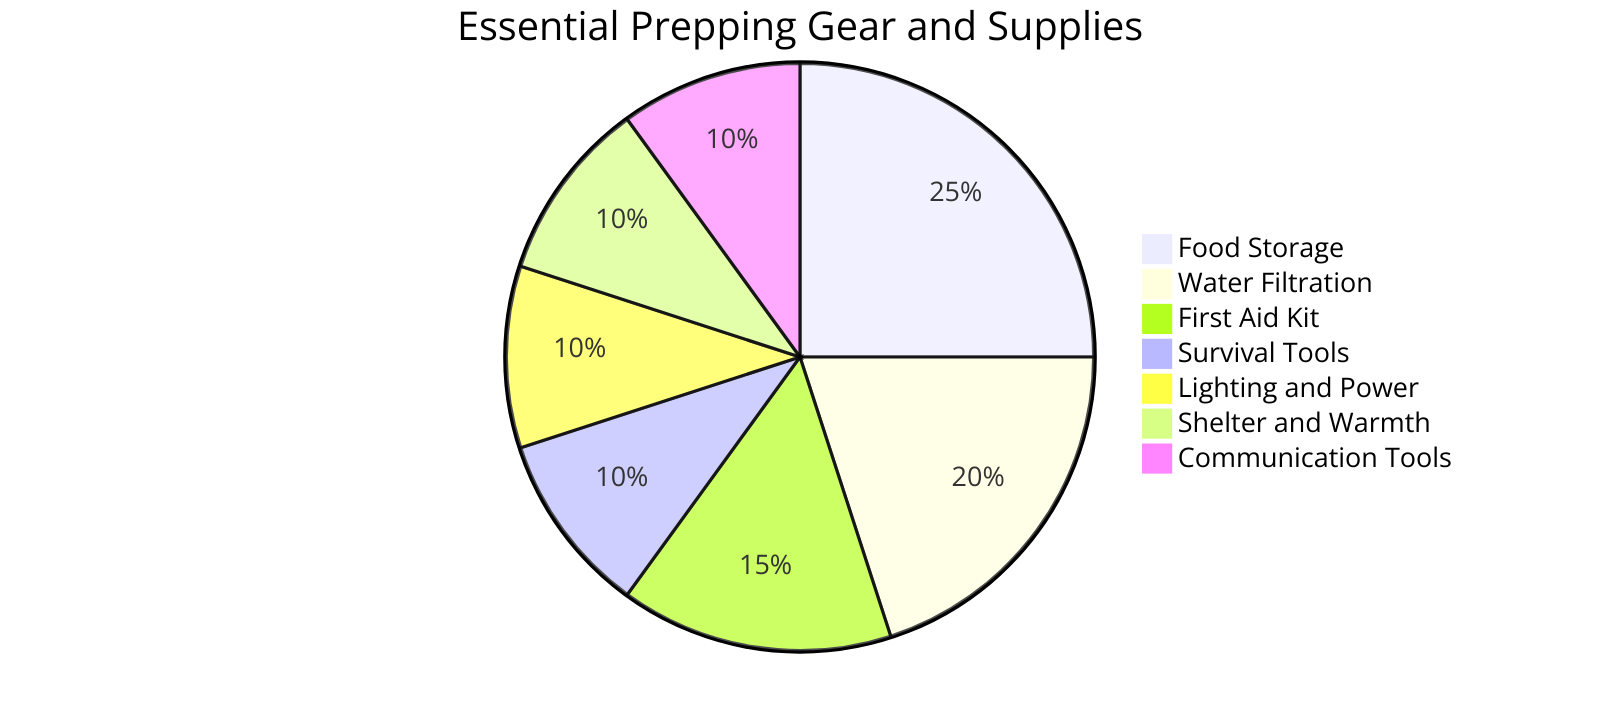 the distribution of essential prepping gear and supplies necessary for disaster preparedness